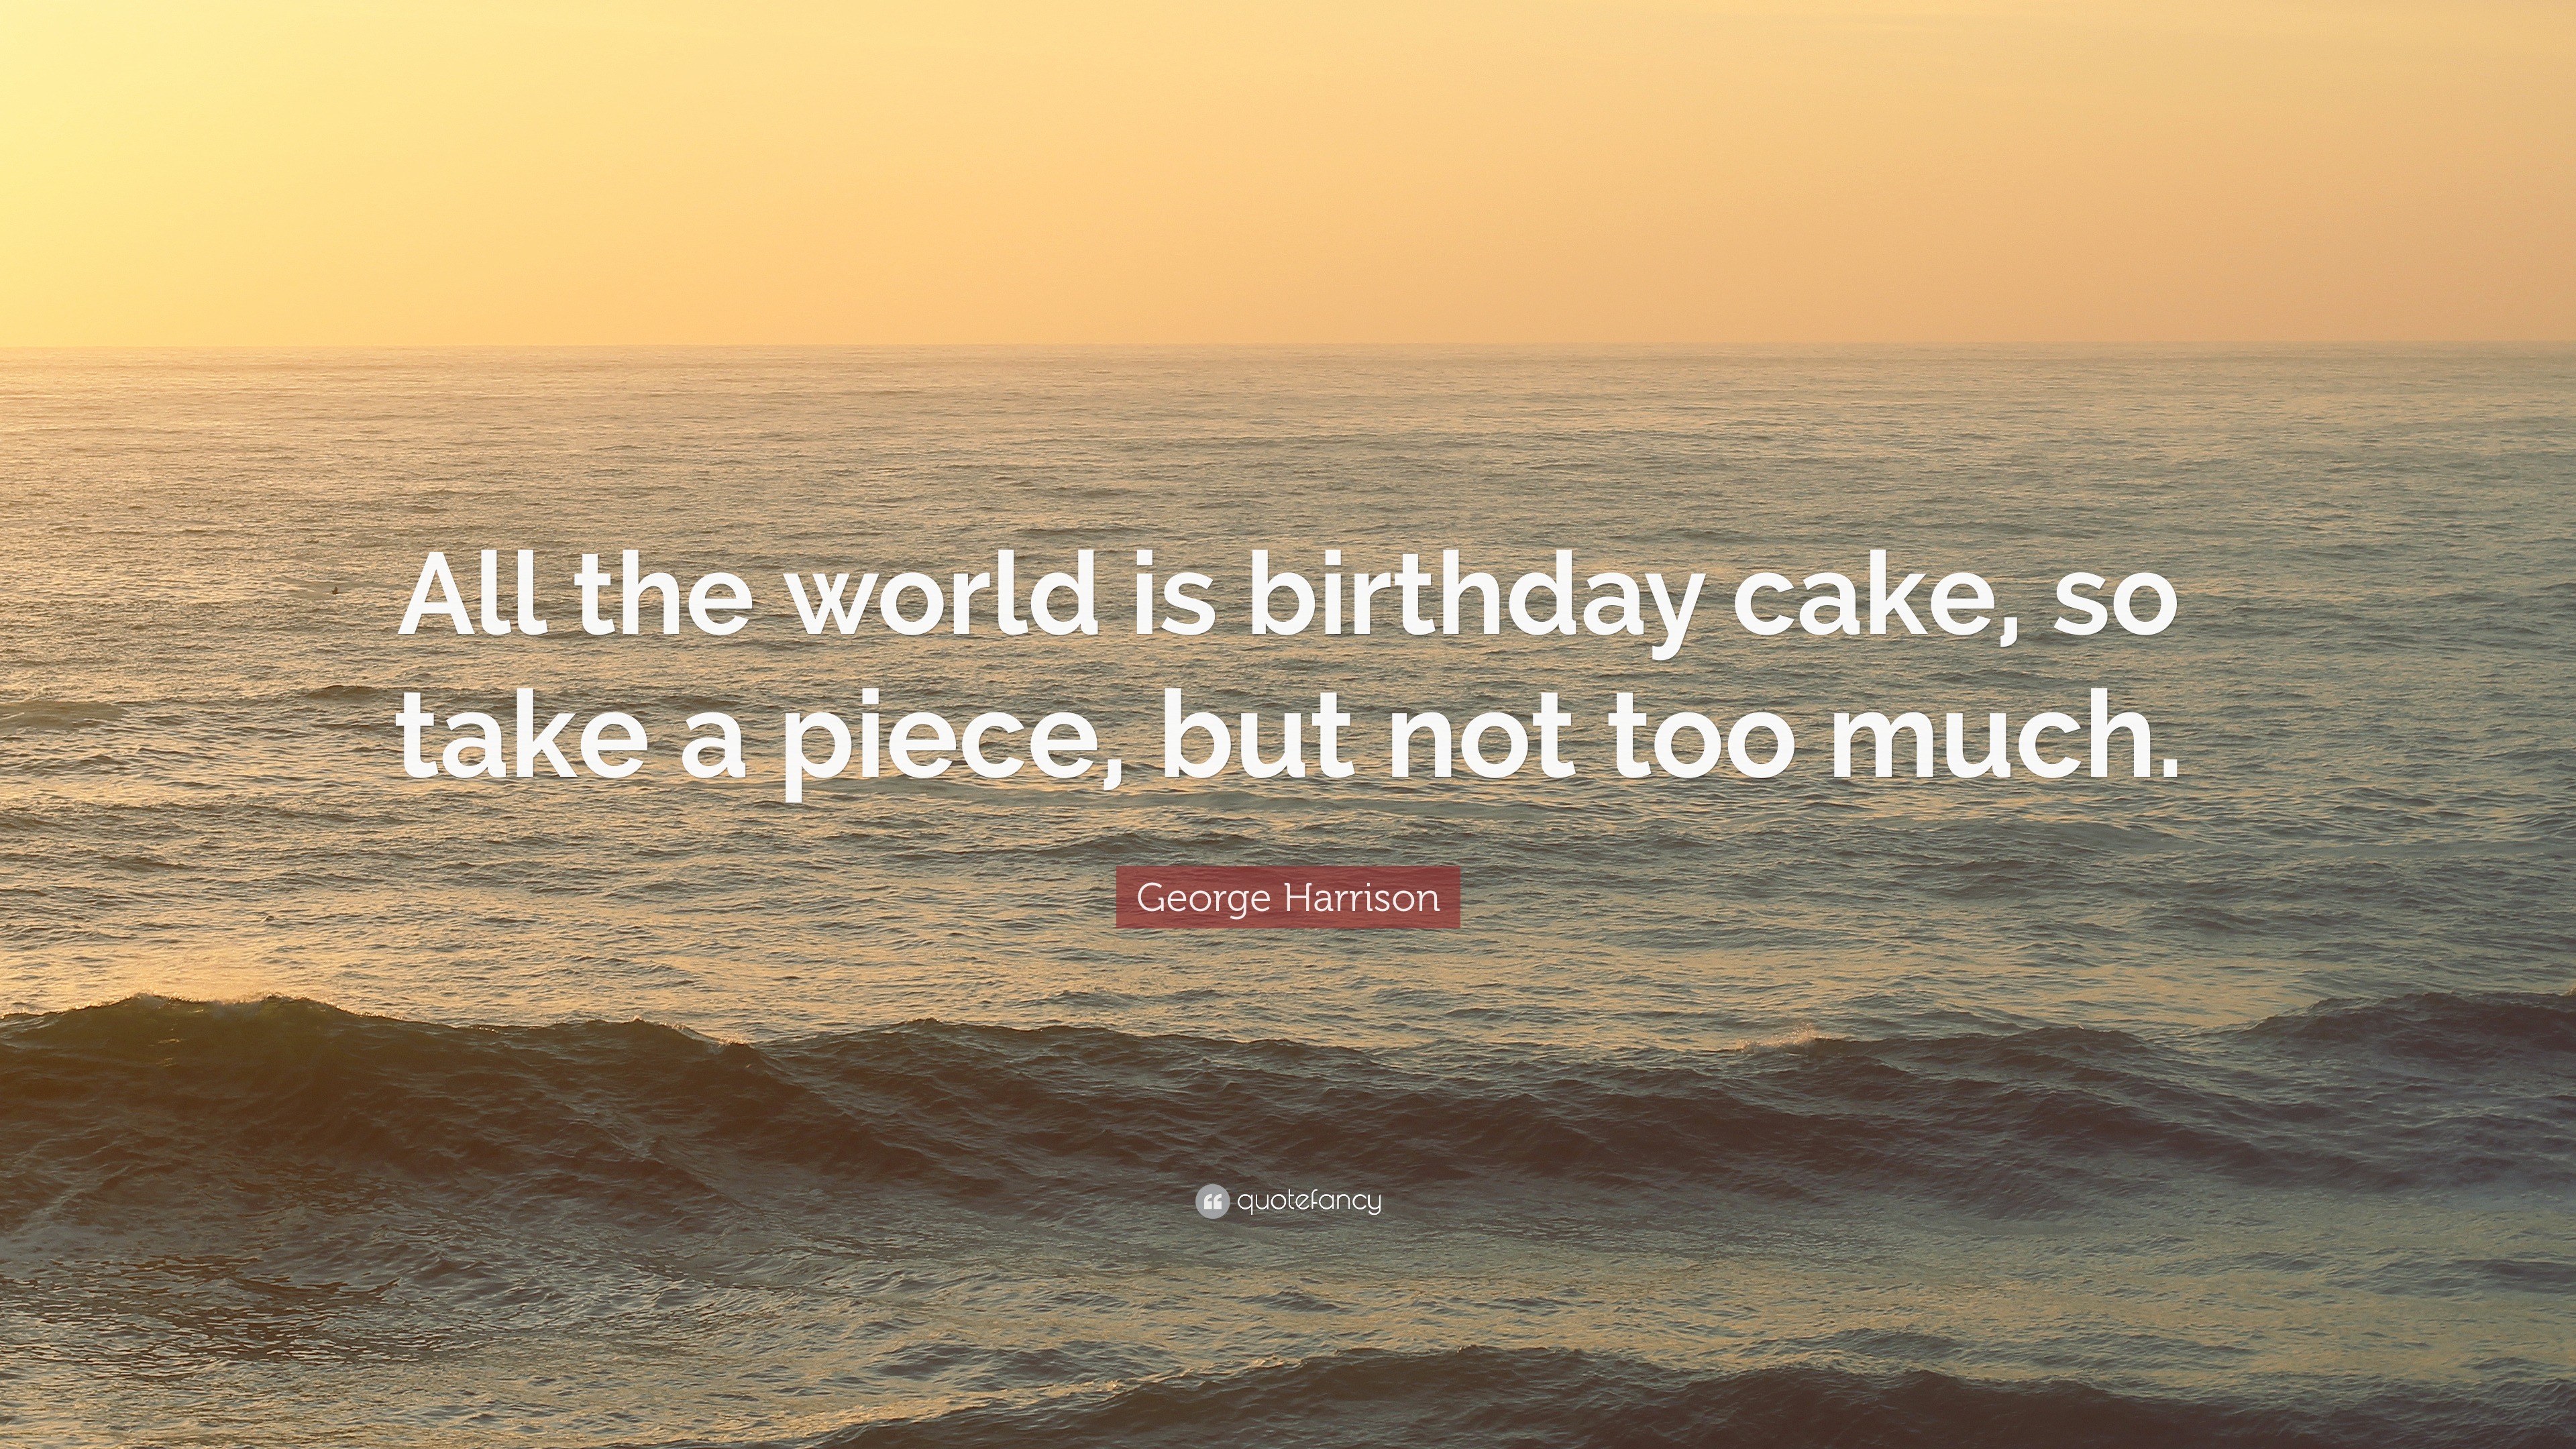 25+ Birthday Cake Quotes Filled With Sweetness - Darling Quote